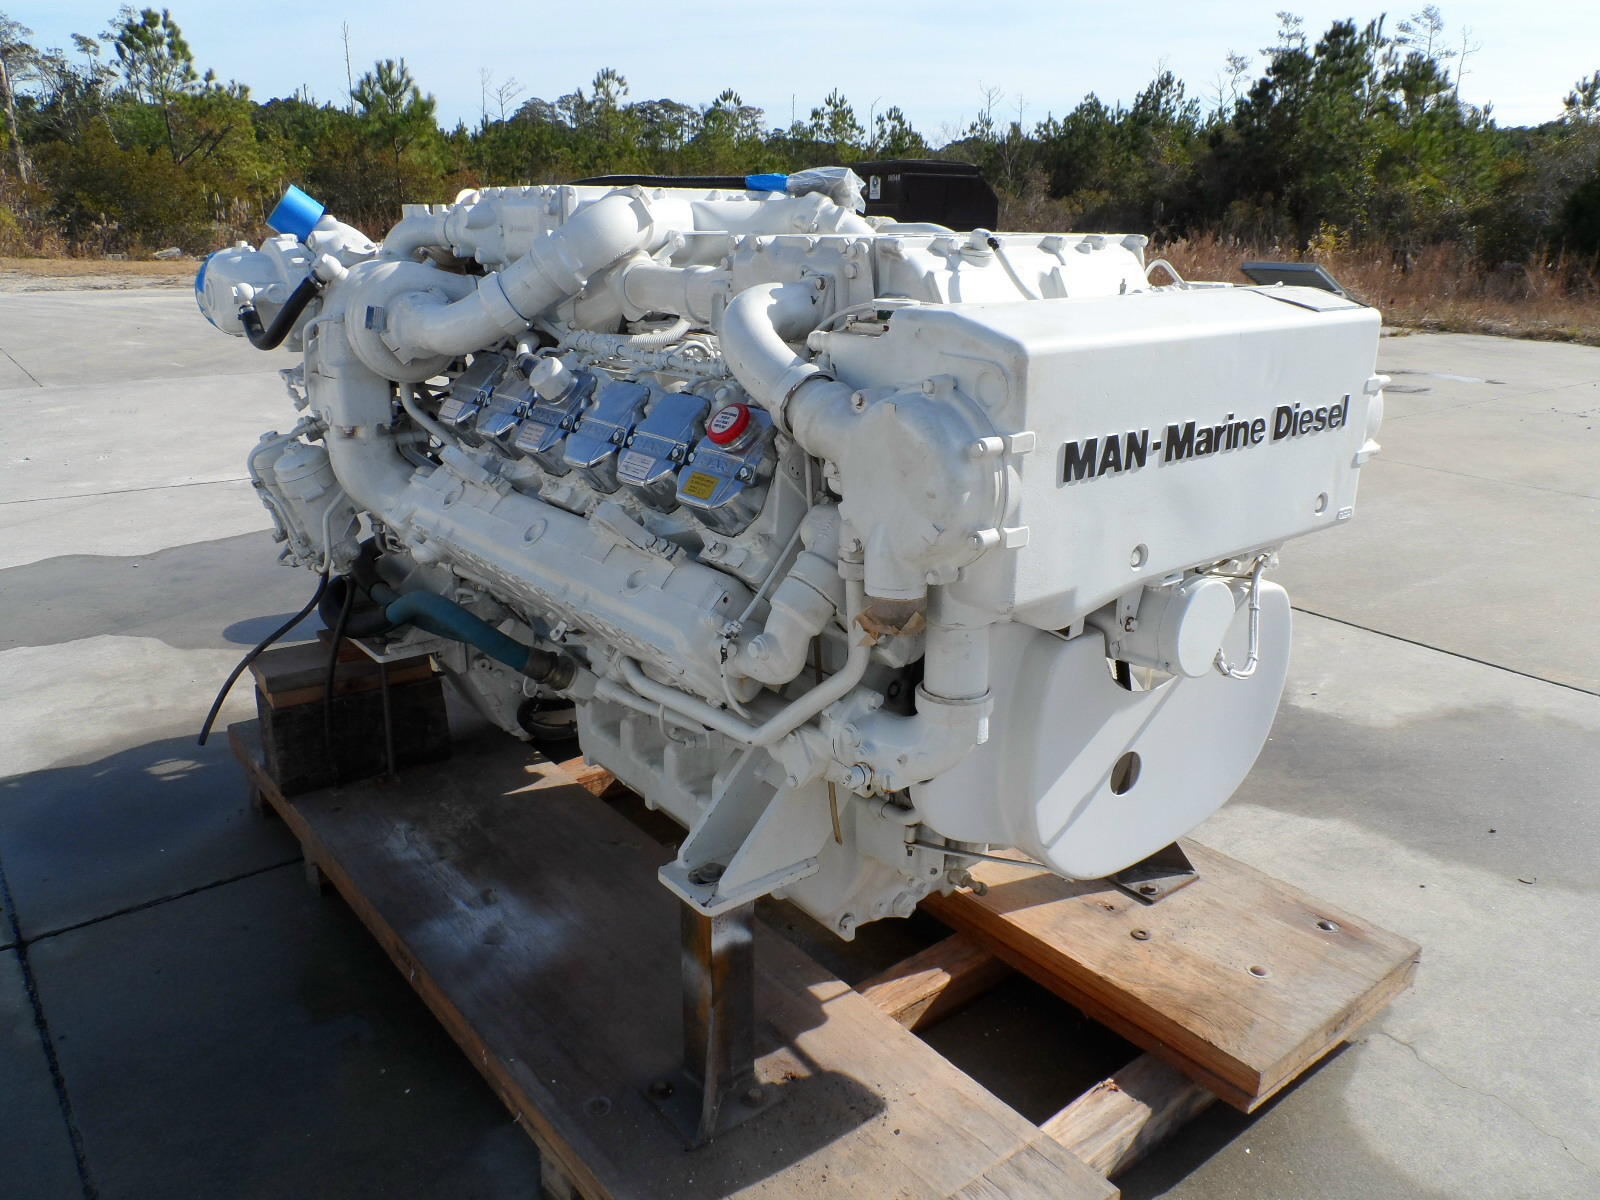 Lamb's Questions and Answers on Marine Diesel Engines